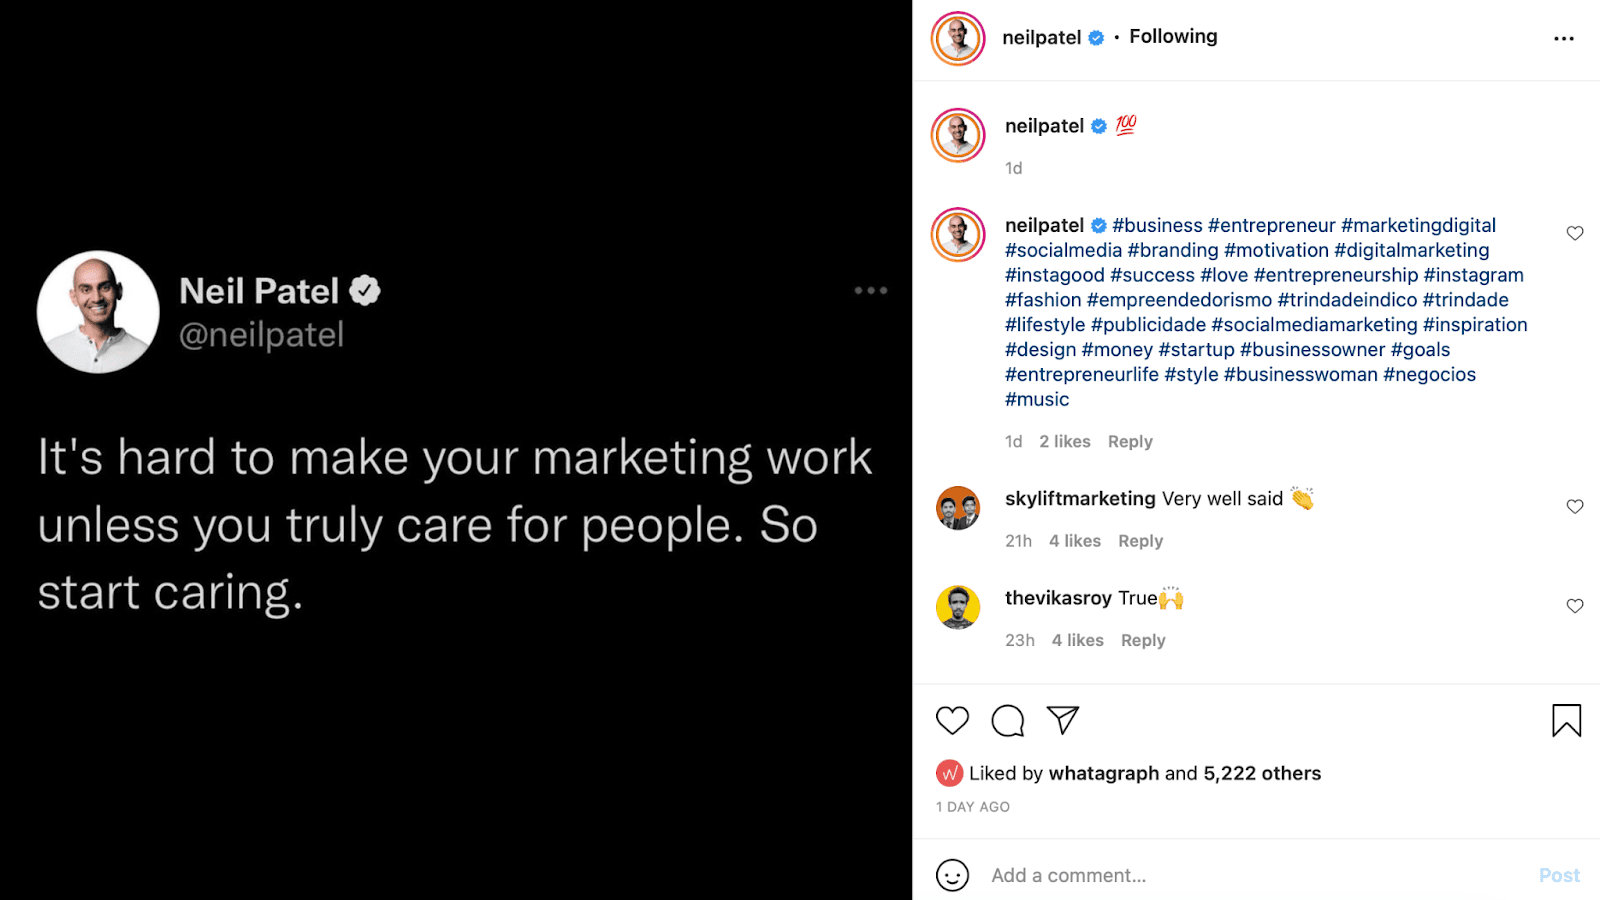 An Instagram post from Neil Patel quoting a tweet he wrote